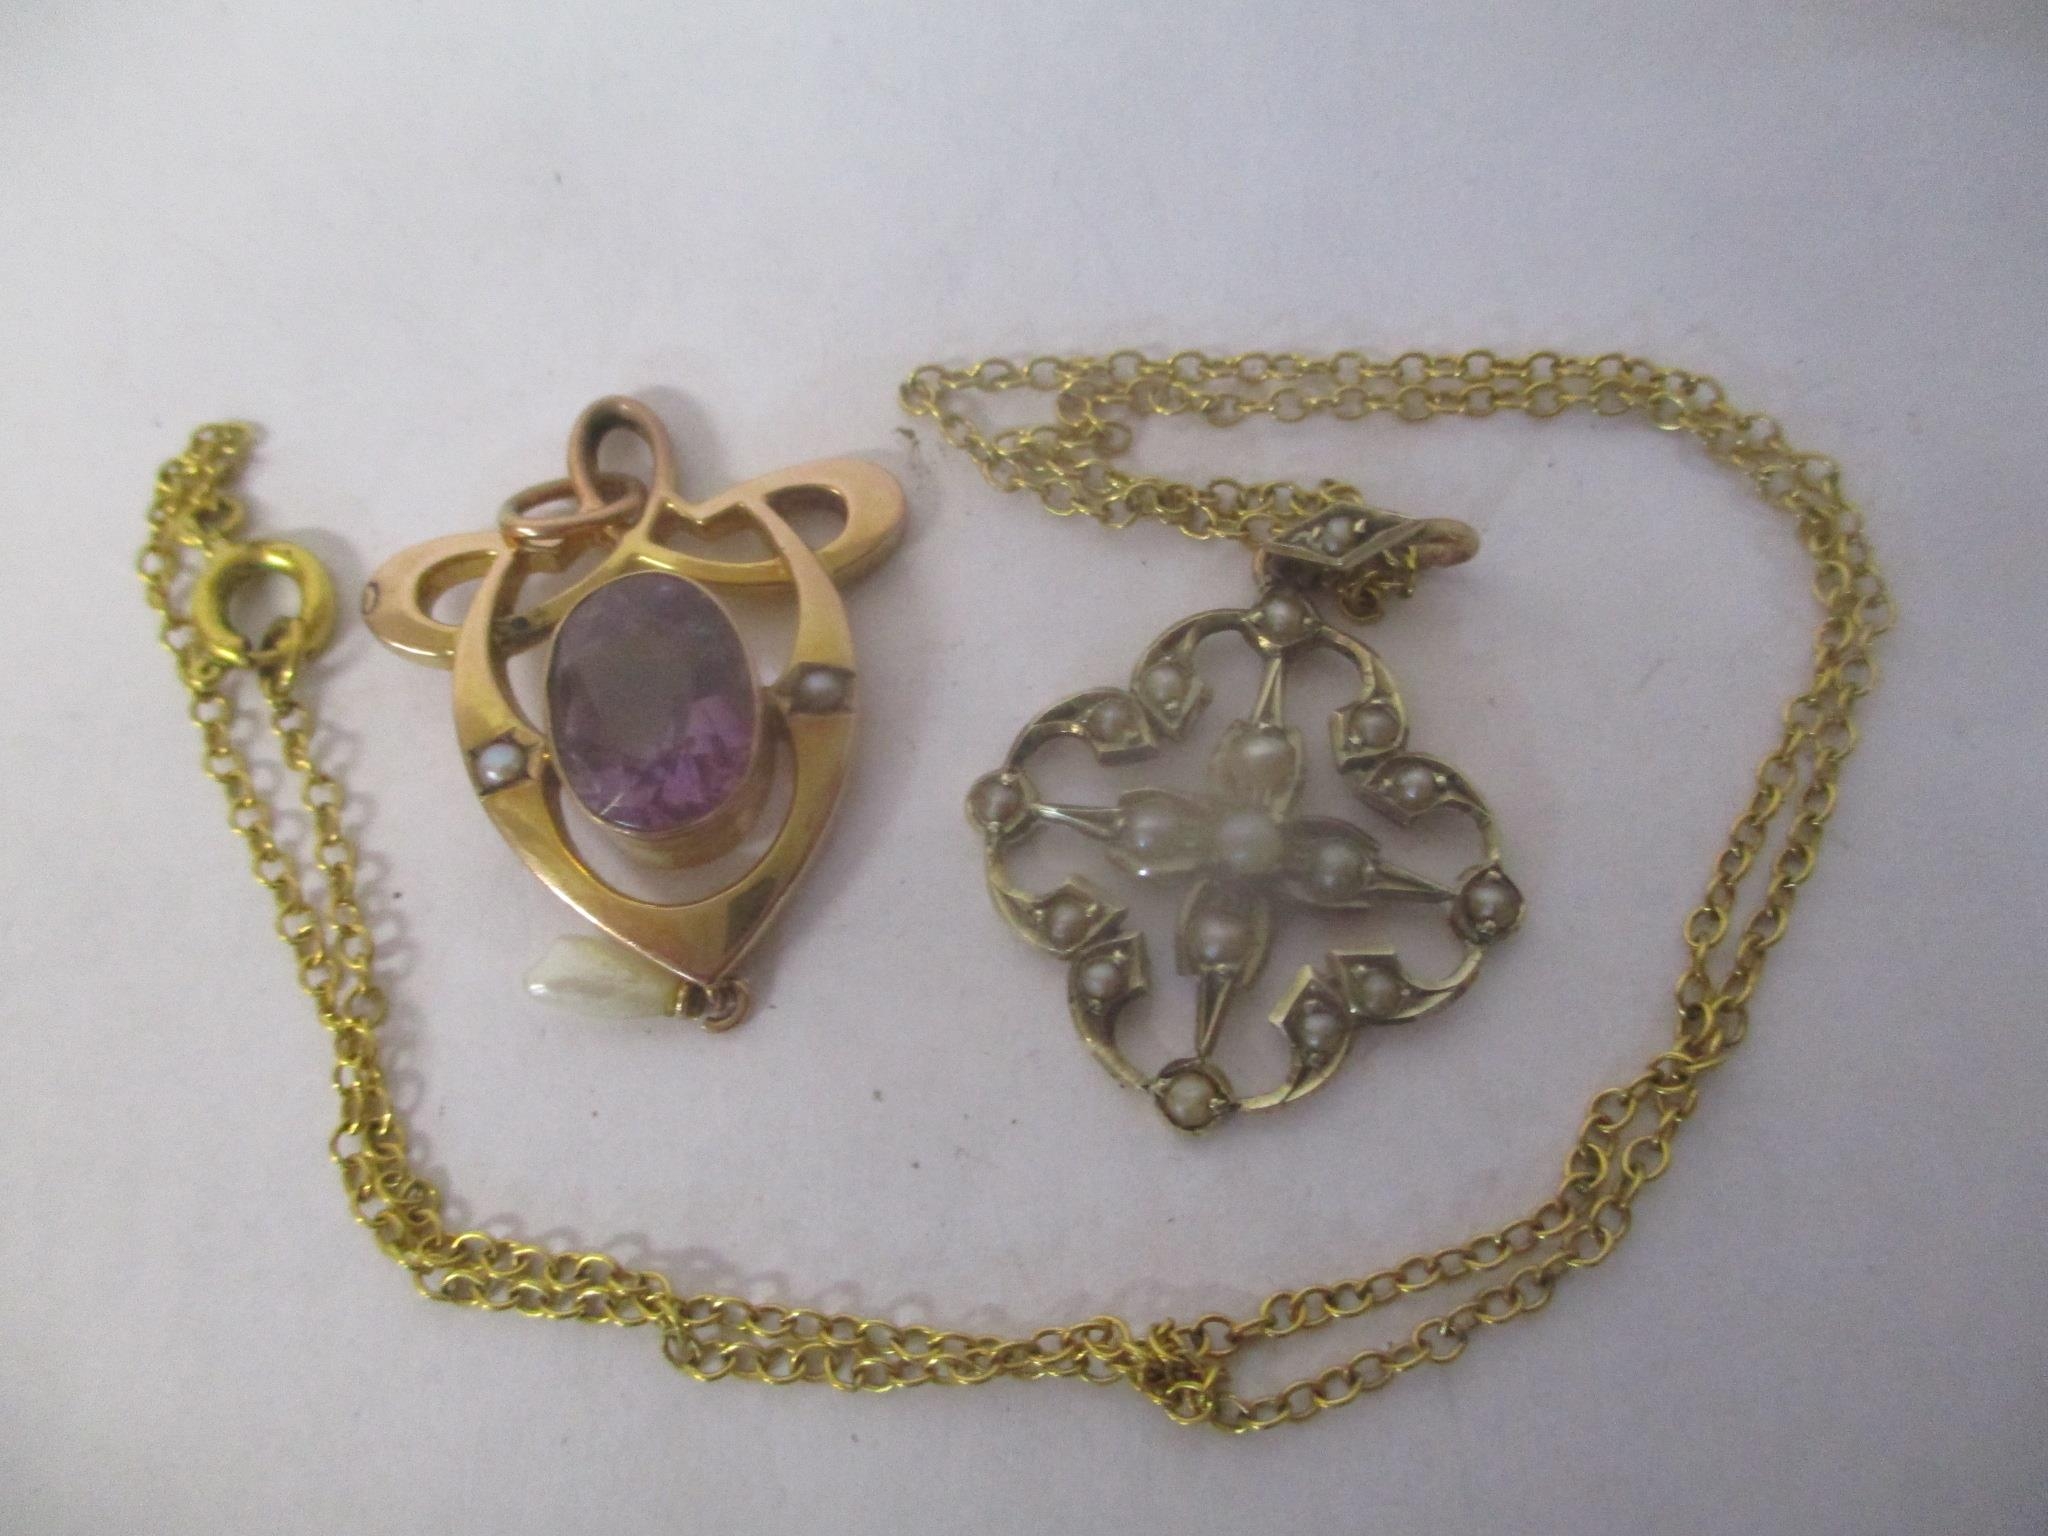 A 9ct gold and seed pearl pendant on a yellow metal necklace, together with a 9ct gold amethyst